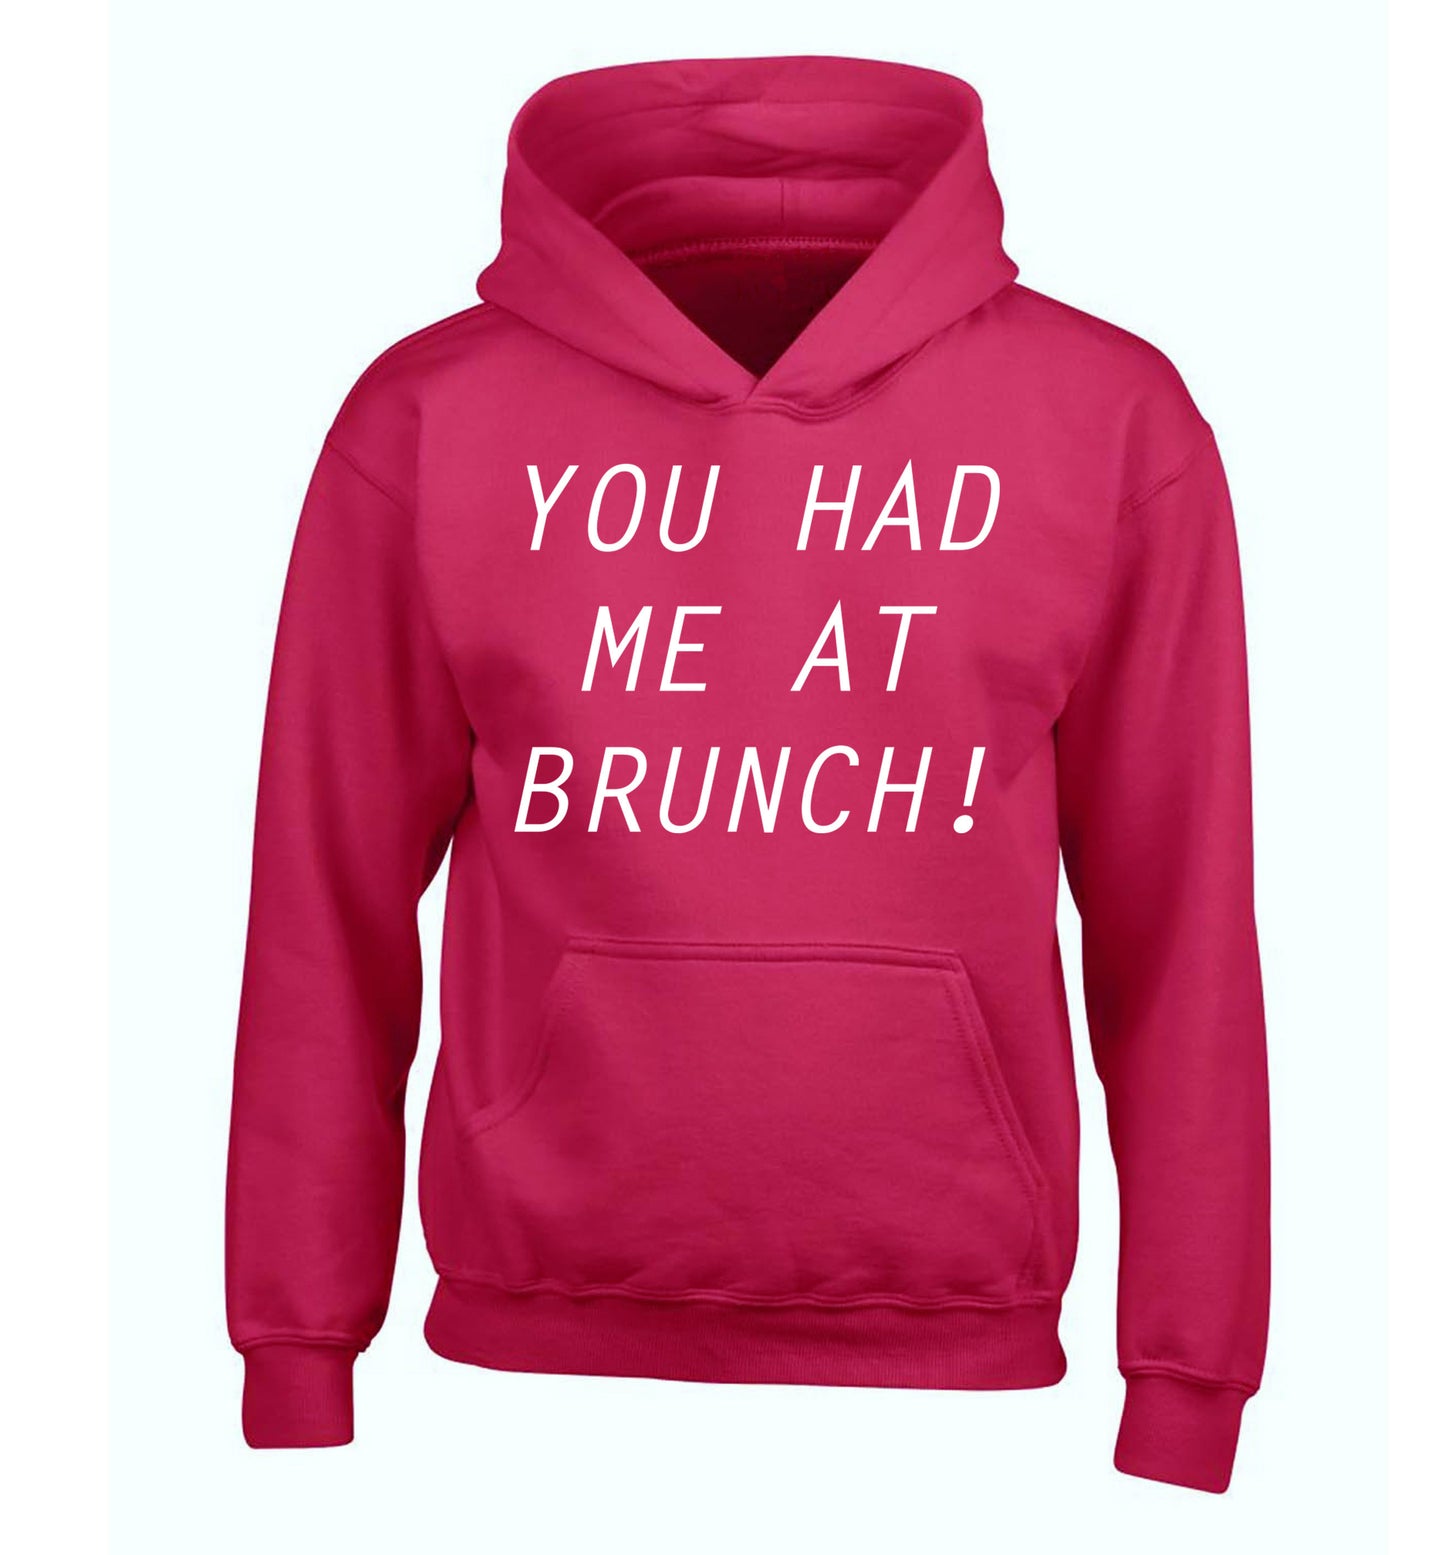 You had me at brunch children's pink hoodie 12-14 Years